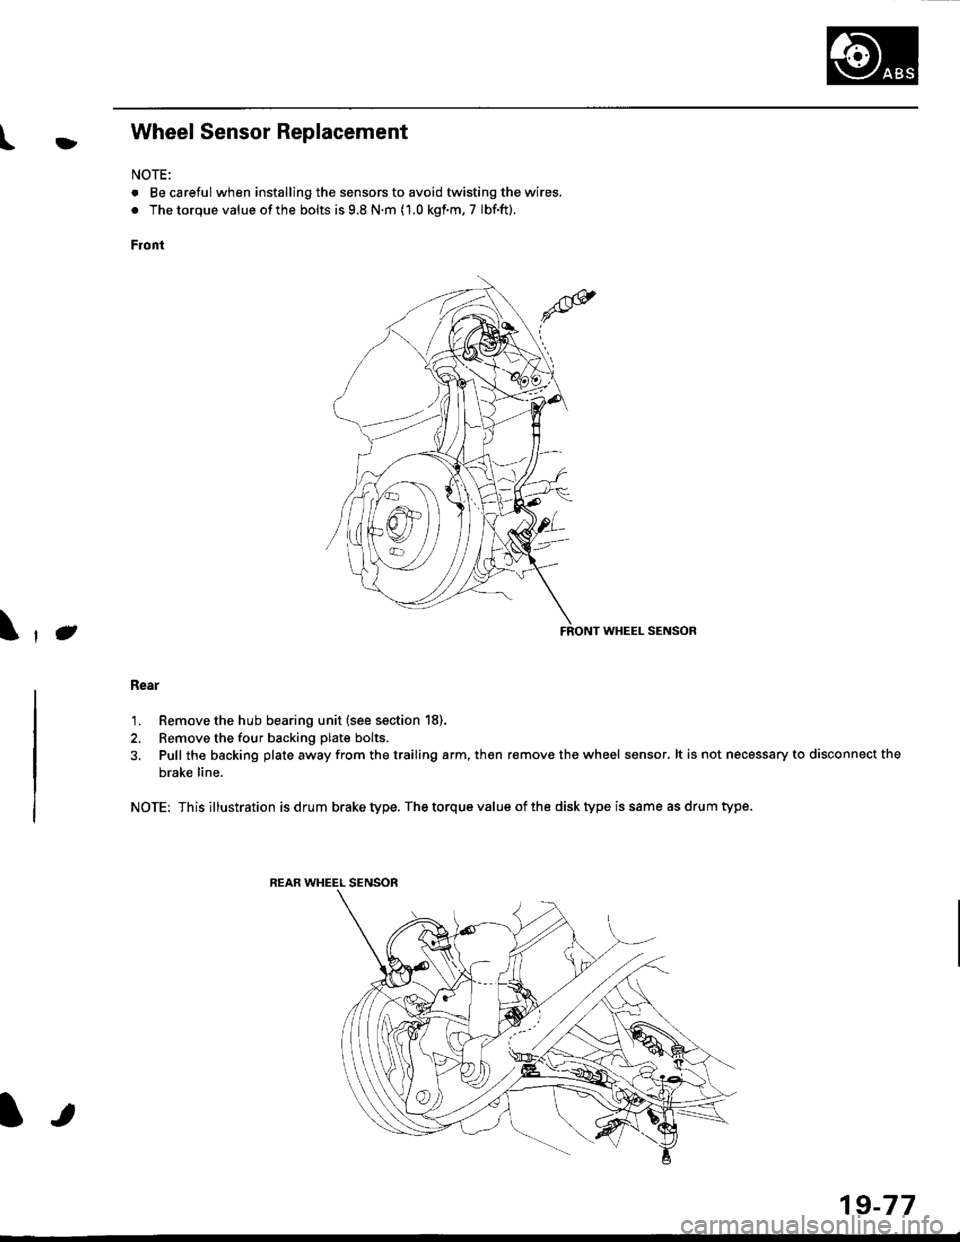 HONDA CIVIC 1997 6.G Owners Guide l}tWheel Sensor Replacement
NOTE:
. Becareful when installingthe sensors to avoid twisting the wires.
. The torque value of the bolts is 9.8 N.m (1.0 kgf.m, 7 lbf.ft).
Front
FRONT WHEEL SENSOR
Rear
1.